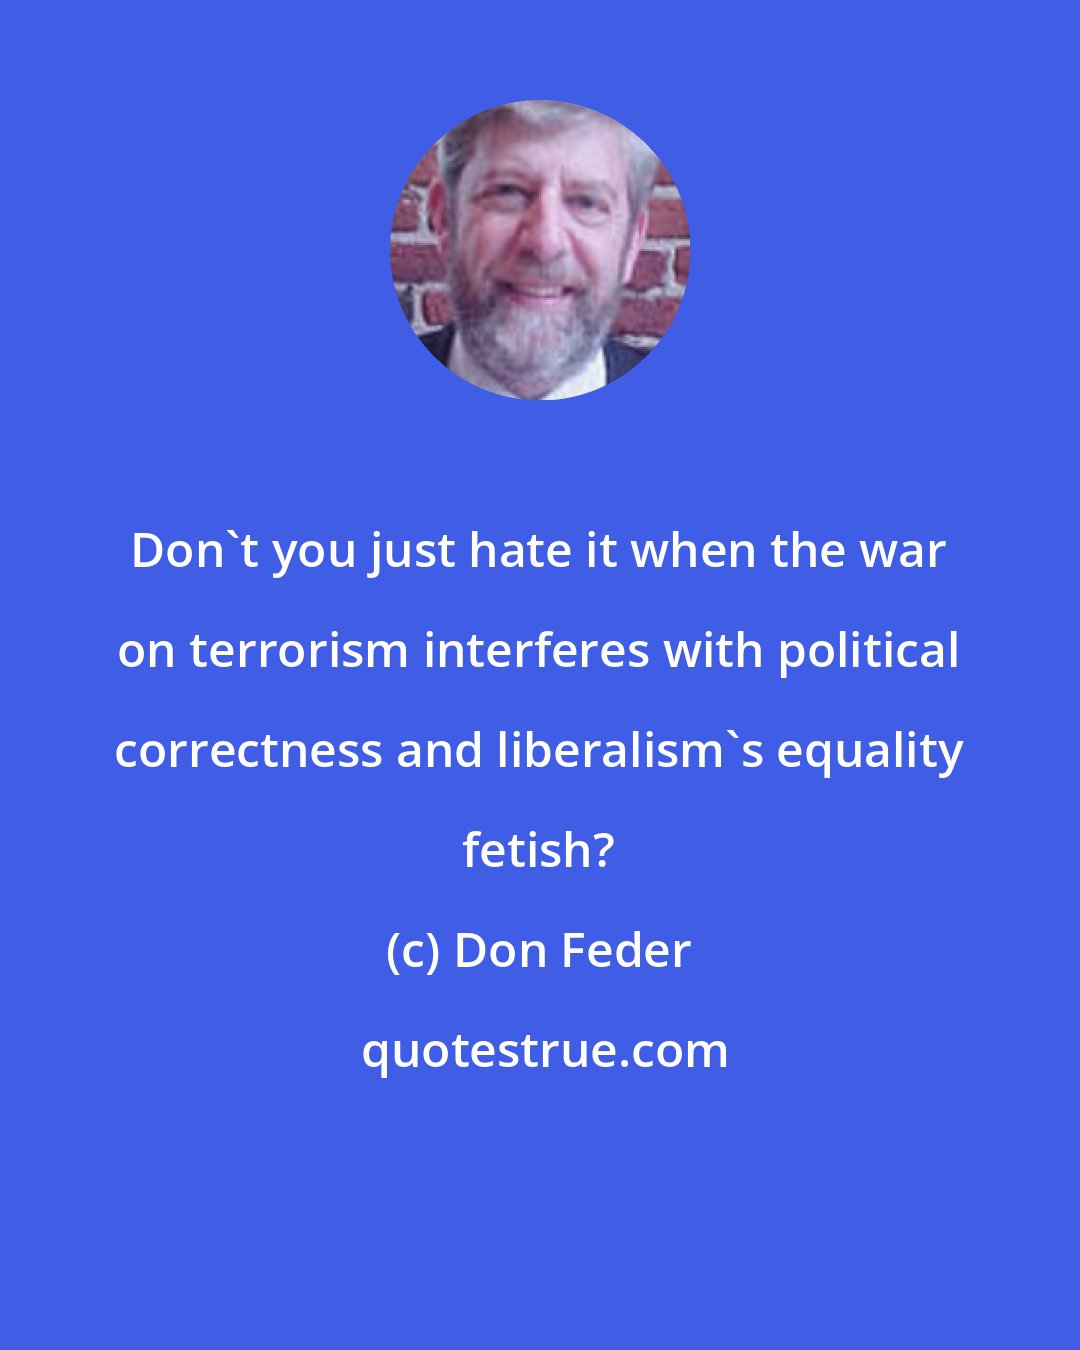 Don Feder: Don't you just hate it when the war on terrorism interferes with political correctness and liberalism's equality fetish?